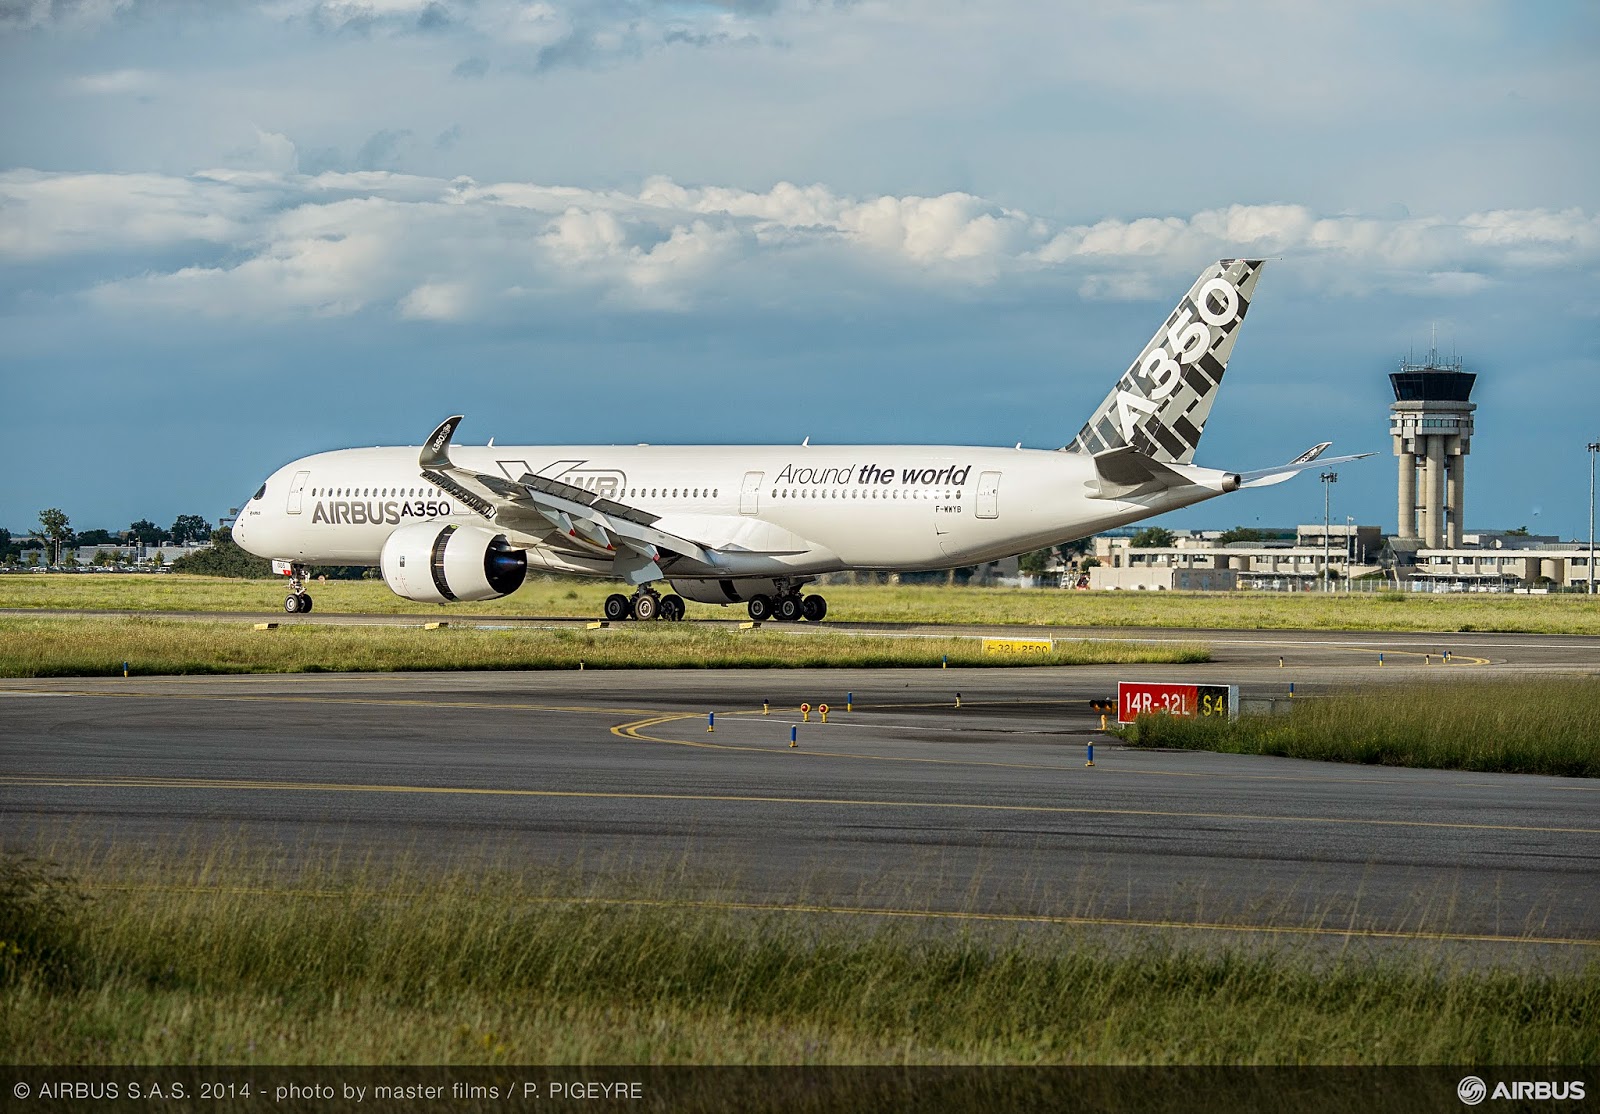 Airbus A350 Xwb Completes Its Route Proving World Tour Flyingphotos